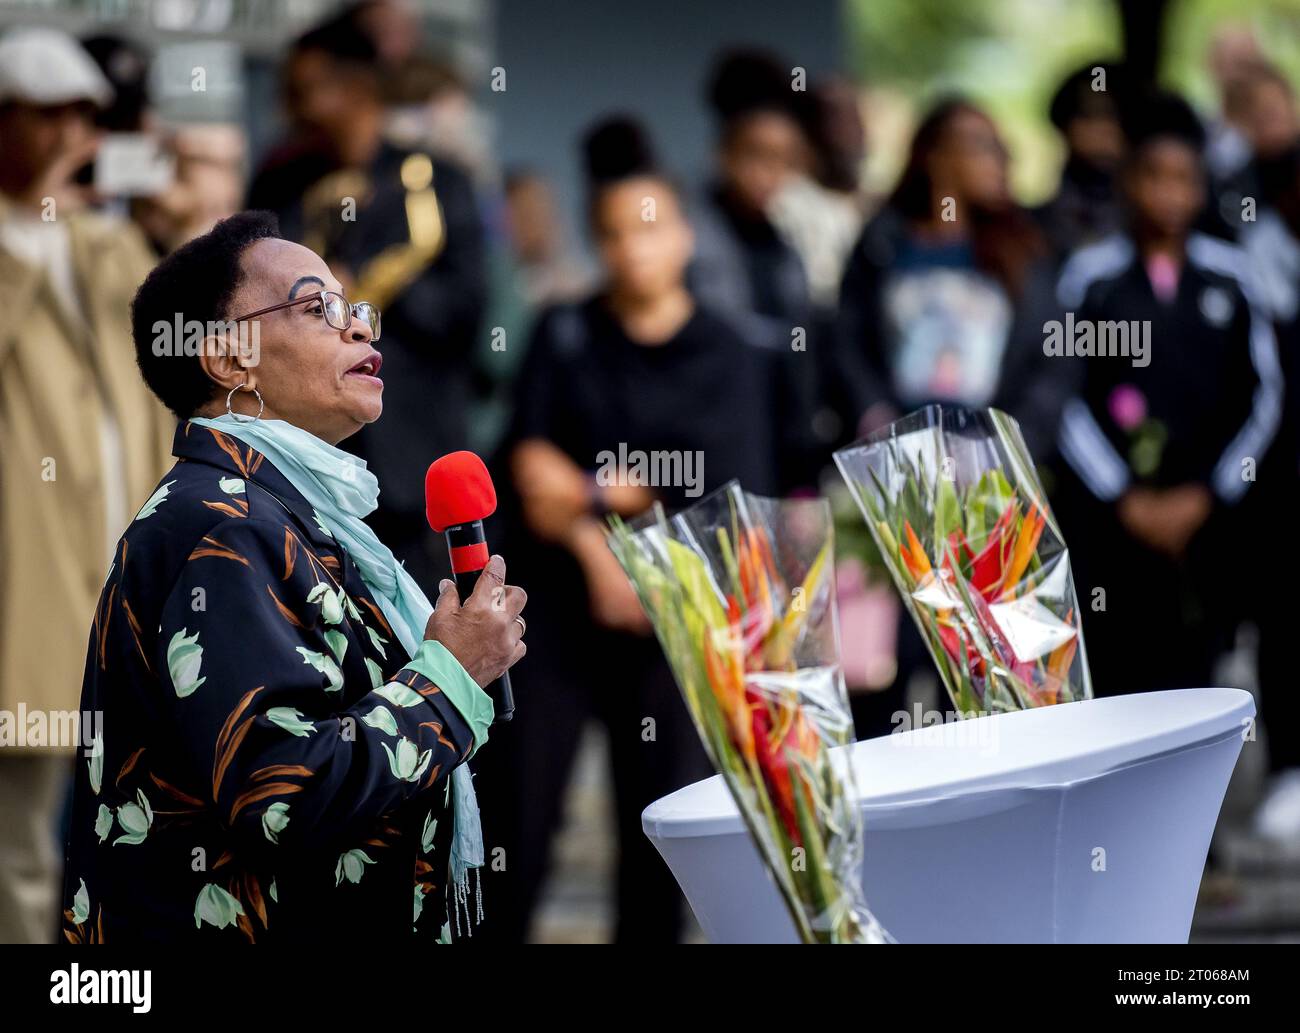 AMSTERDAM - Relatives and other involved parties during the annual commemoration of the Bijlmer air disaster. It has been 31 years since a cargo plane from the Israeli airline El Al crashed in the Bijlmer. ANP KOEN VAN WEEL netherlands out - belgium out Stock Photo